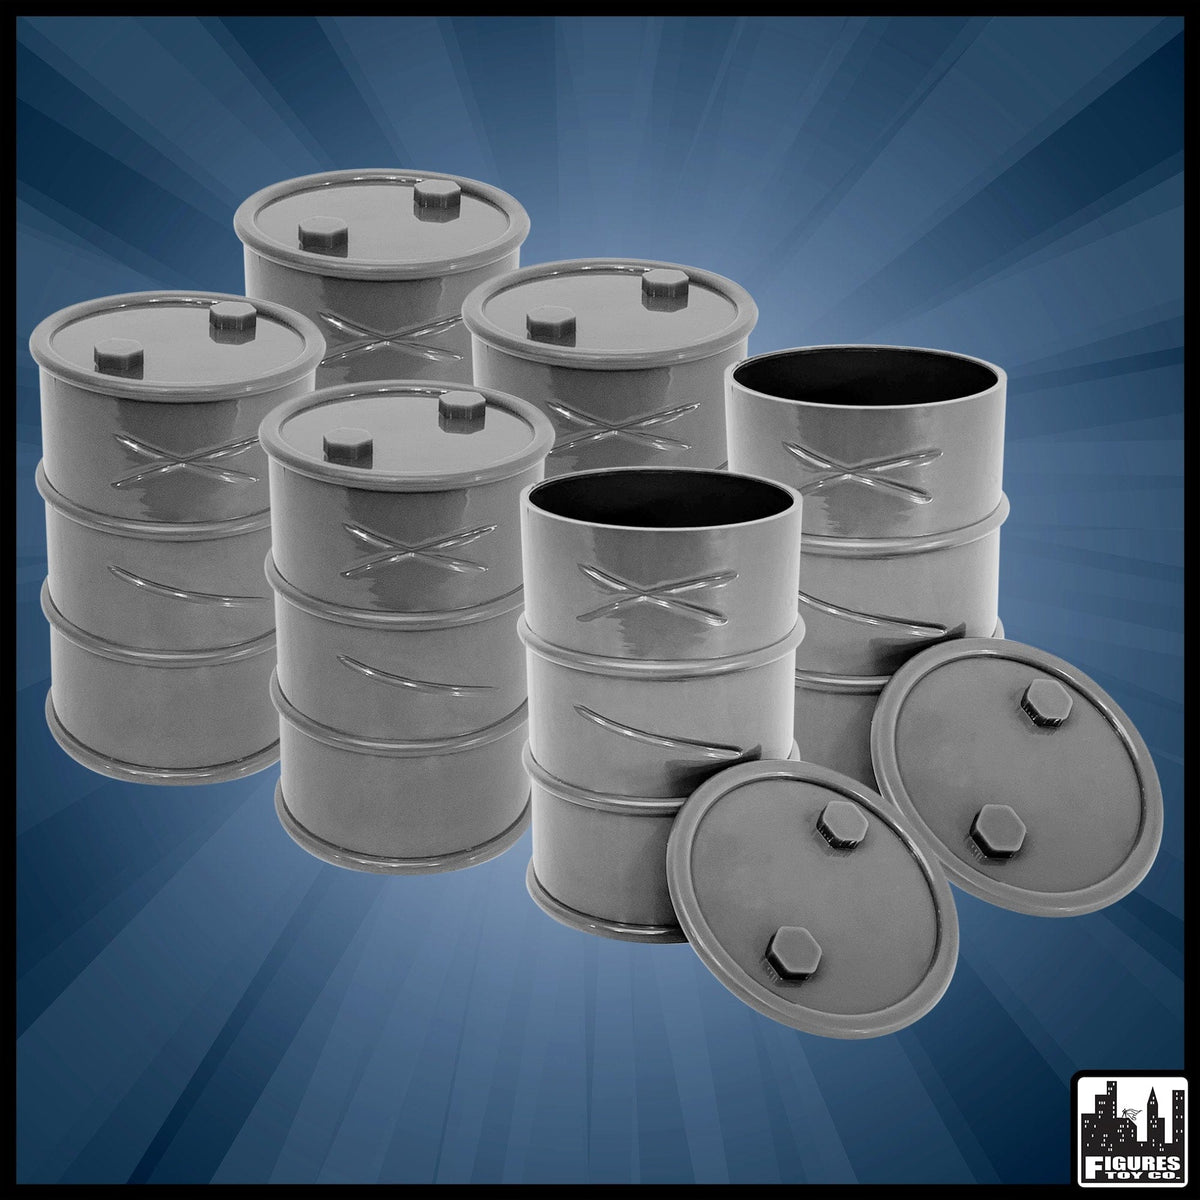 Set of 6 Gray Plastic Toy Oil Drums For WWE Wrestling Action Figures